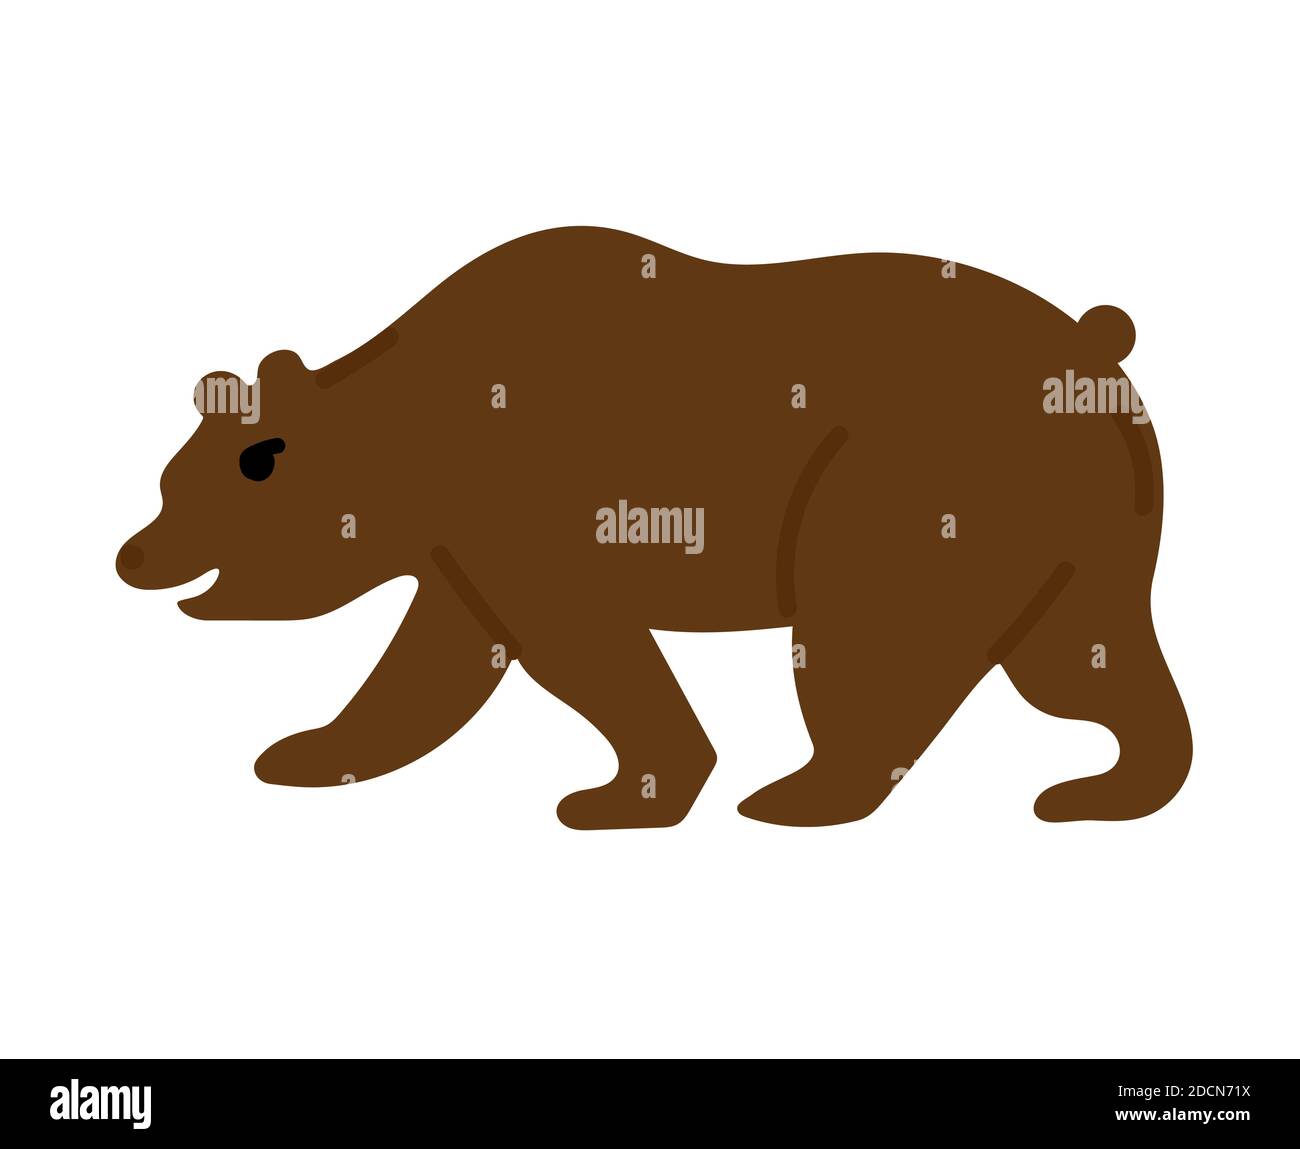 Grizzly bear. Hand drawn vector illustration isolated on white background. Stock Vector